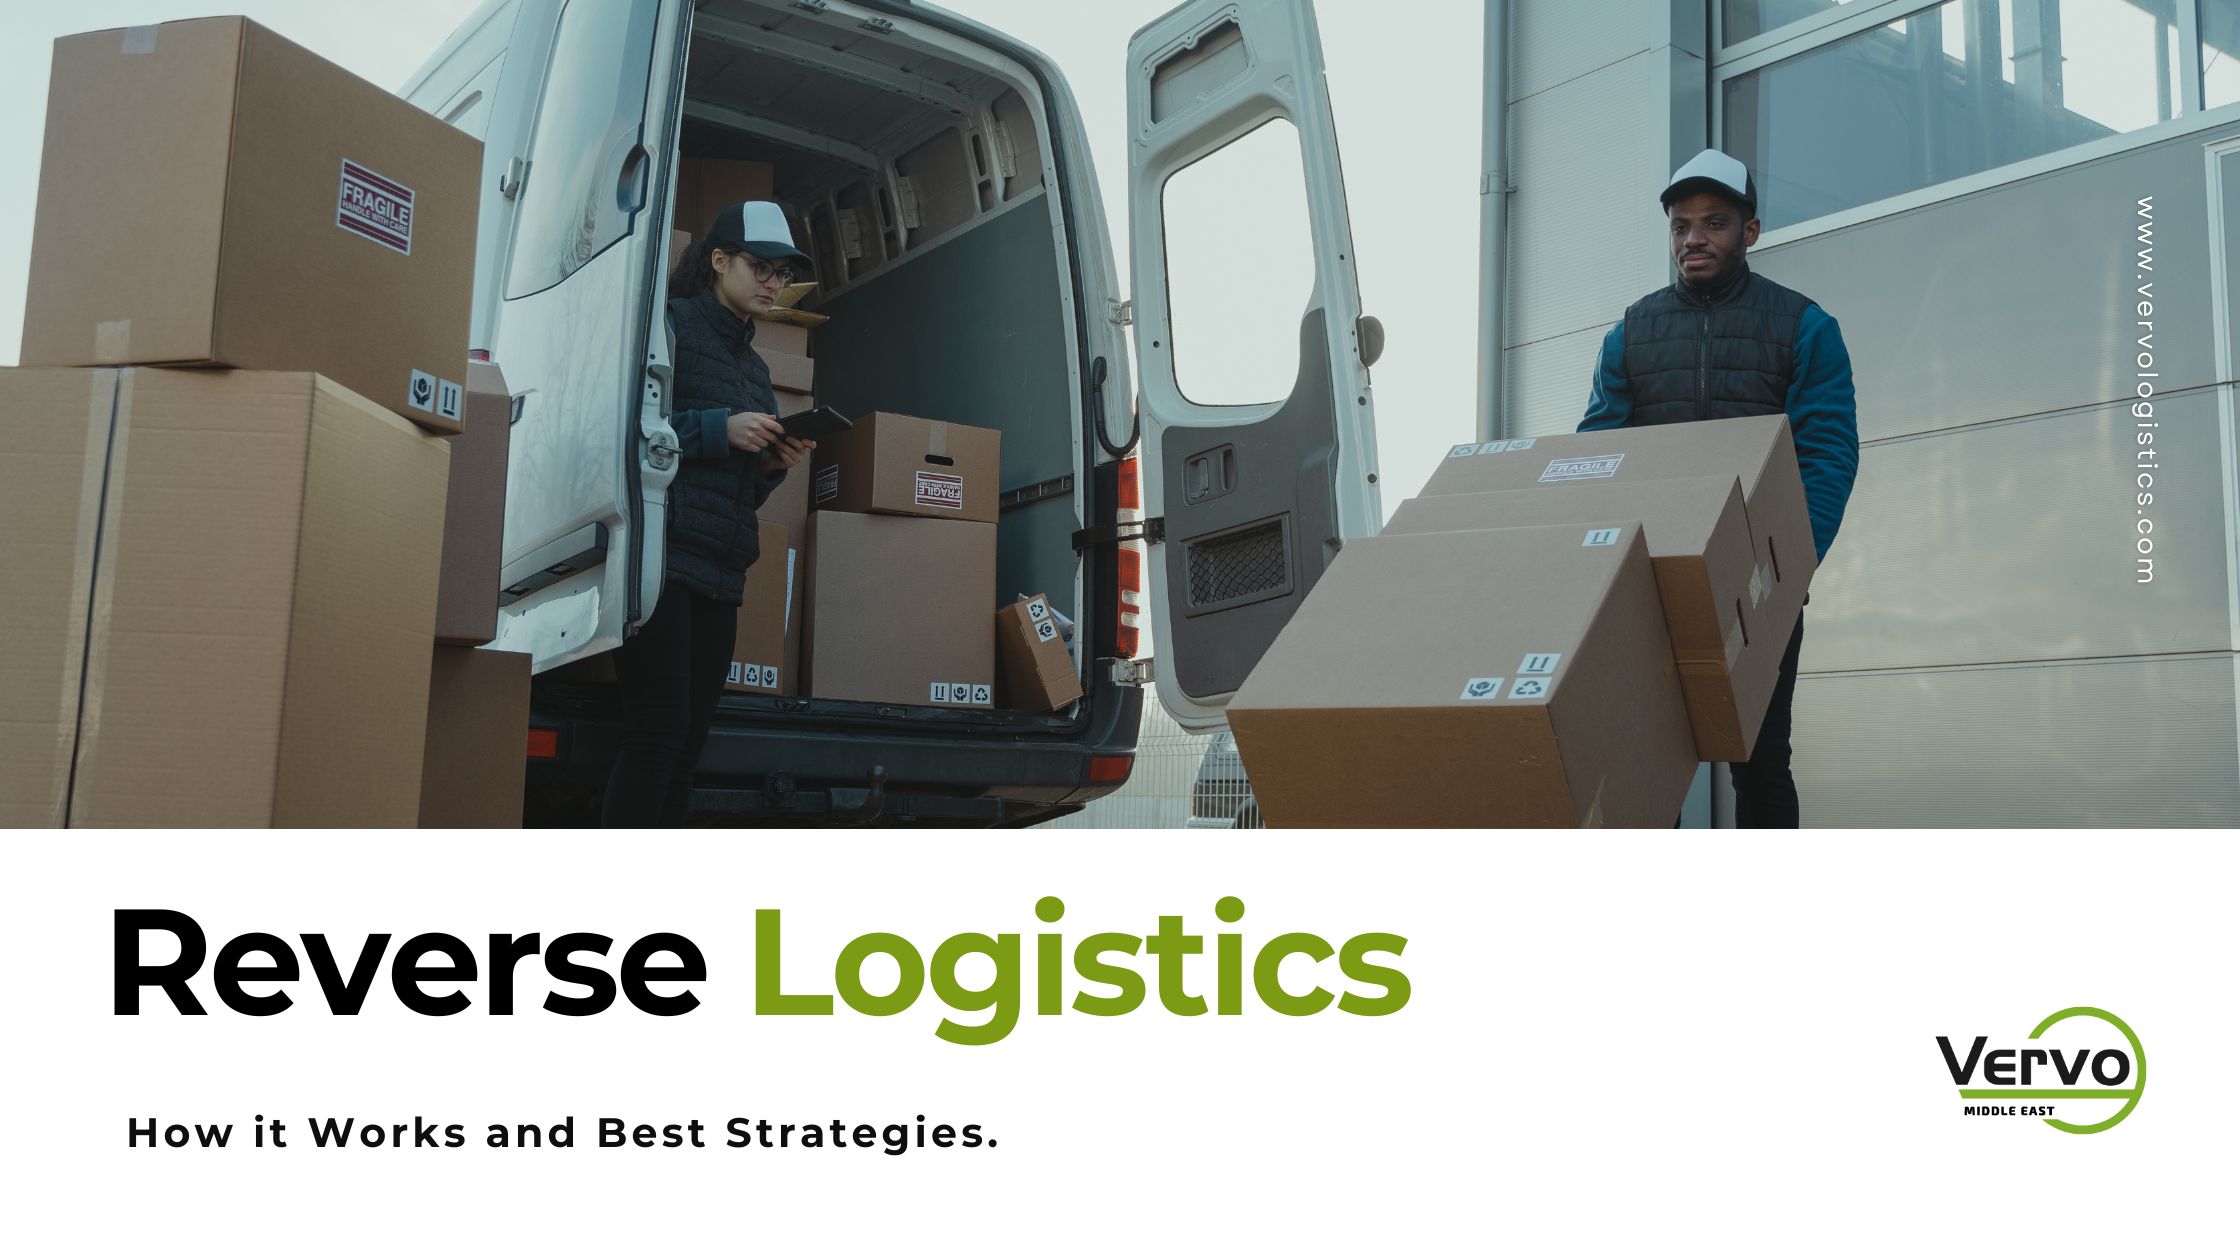 Reverse logistics how it works by vervo middle east for reverse logistics services in the uae